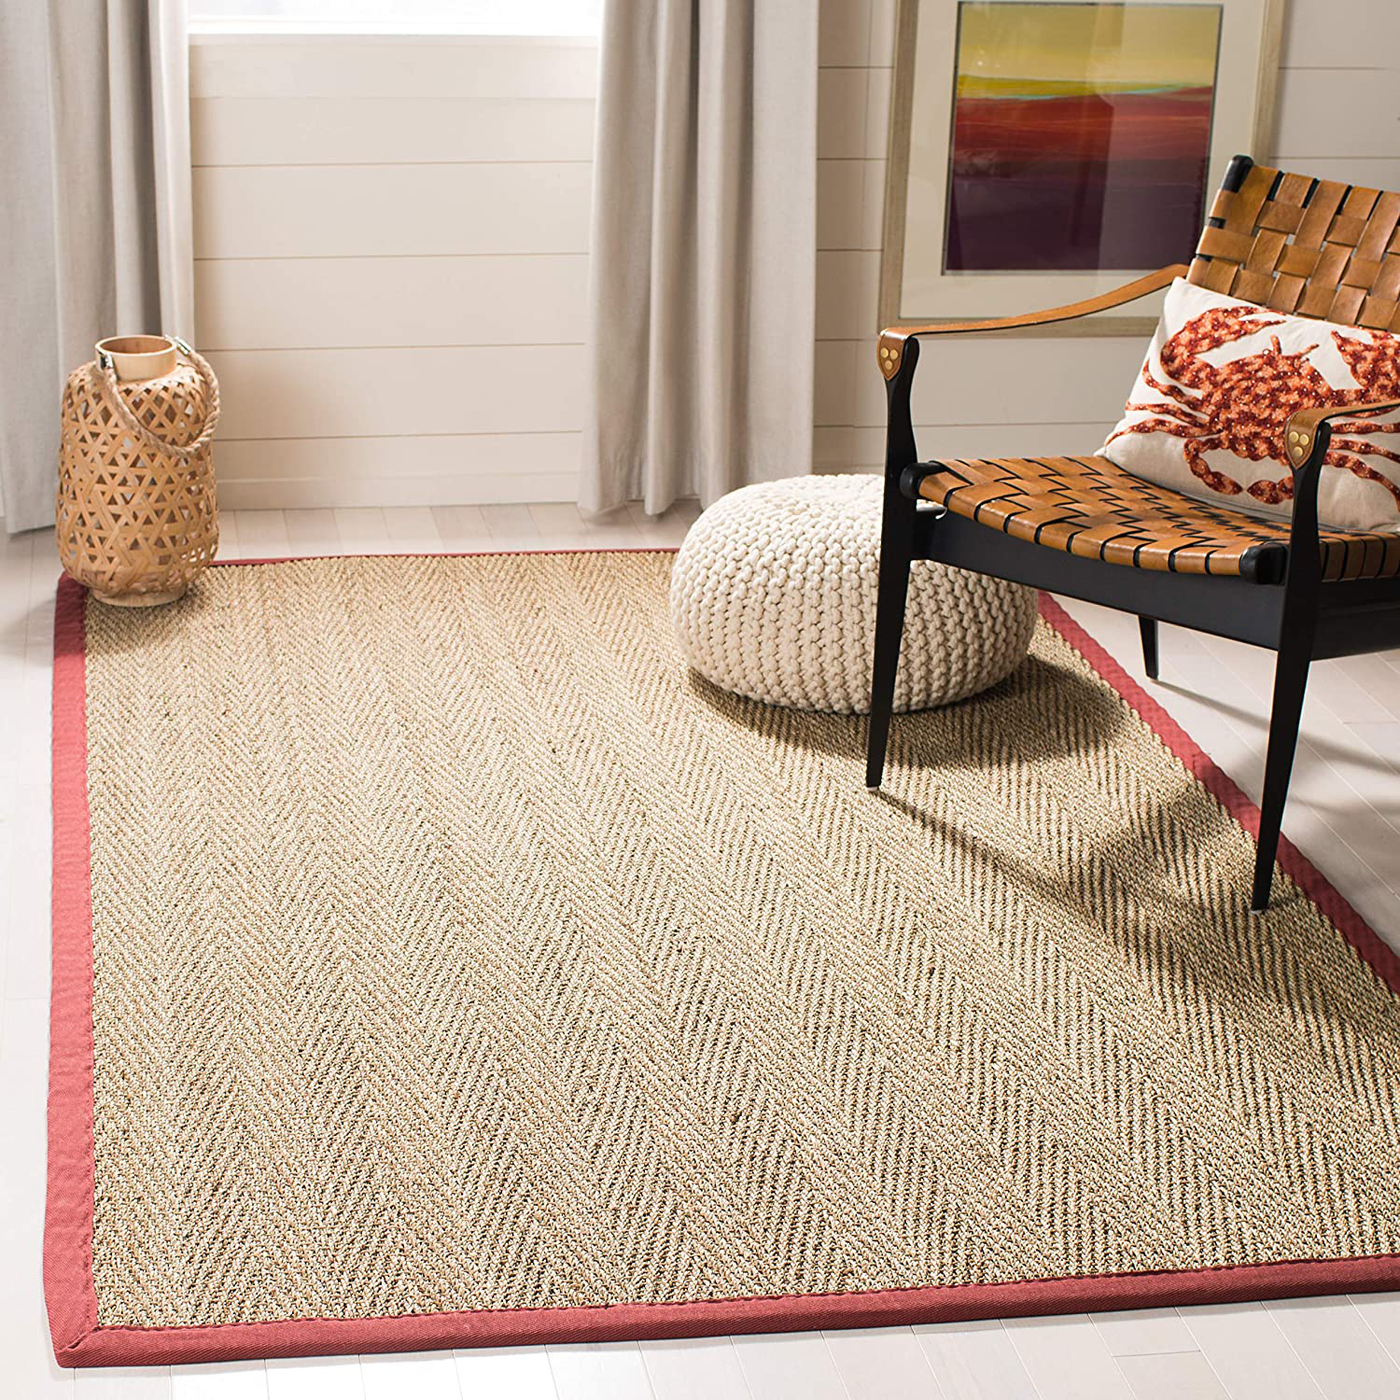 Safavieh Natural Fiber Collection NF115D Border Herringbone Seagrass Area Rug, 4' x 6', Red